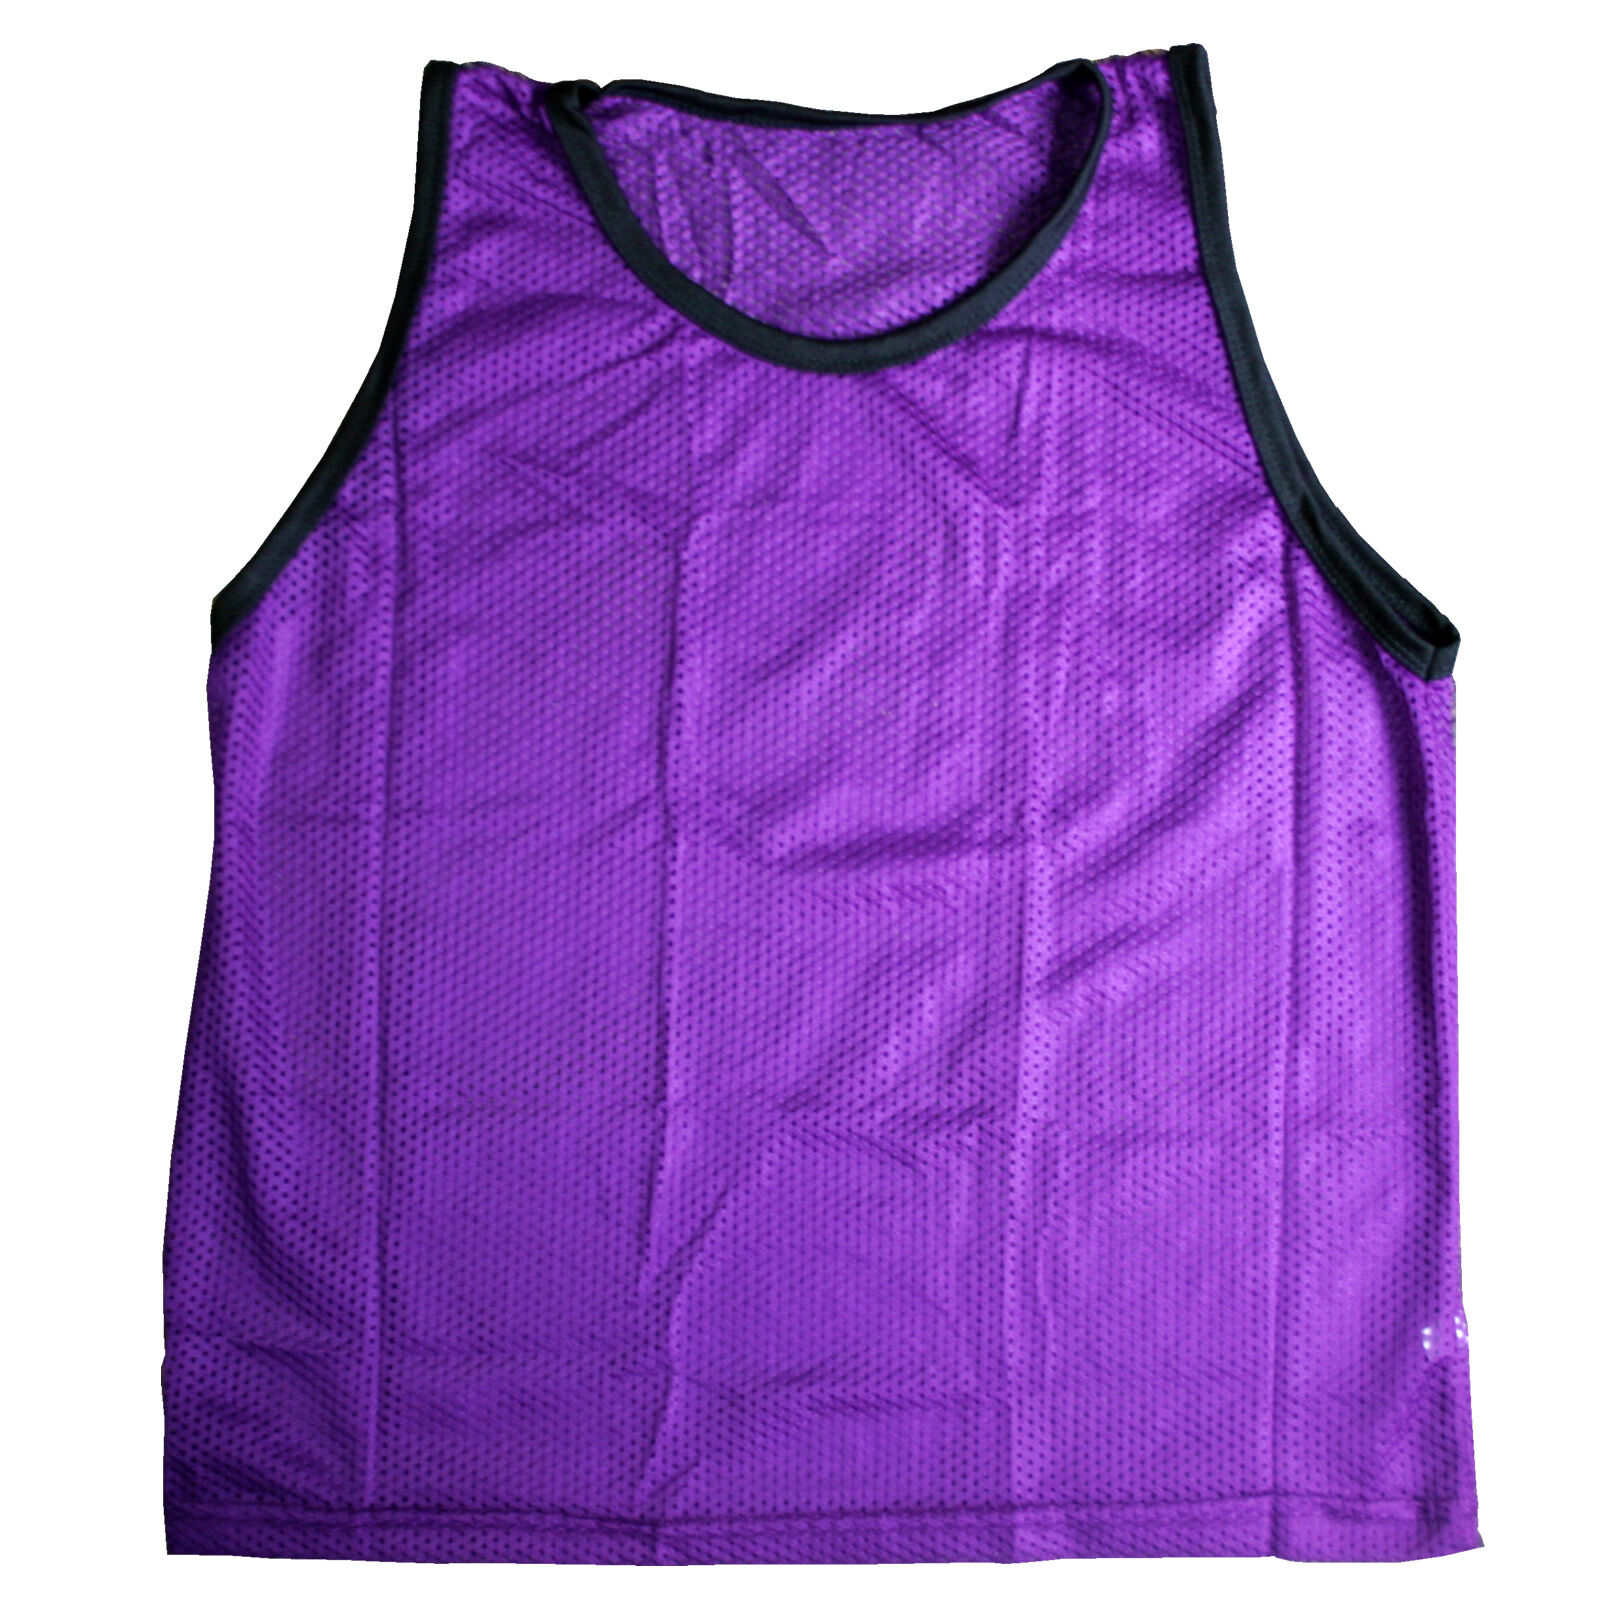 Adult Purple Scrimmage Training Vests Pinnie Uniform For Sports